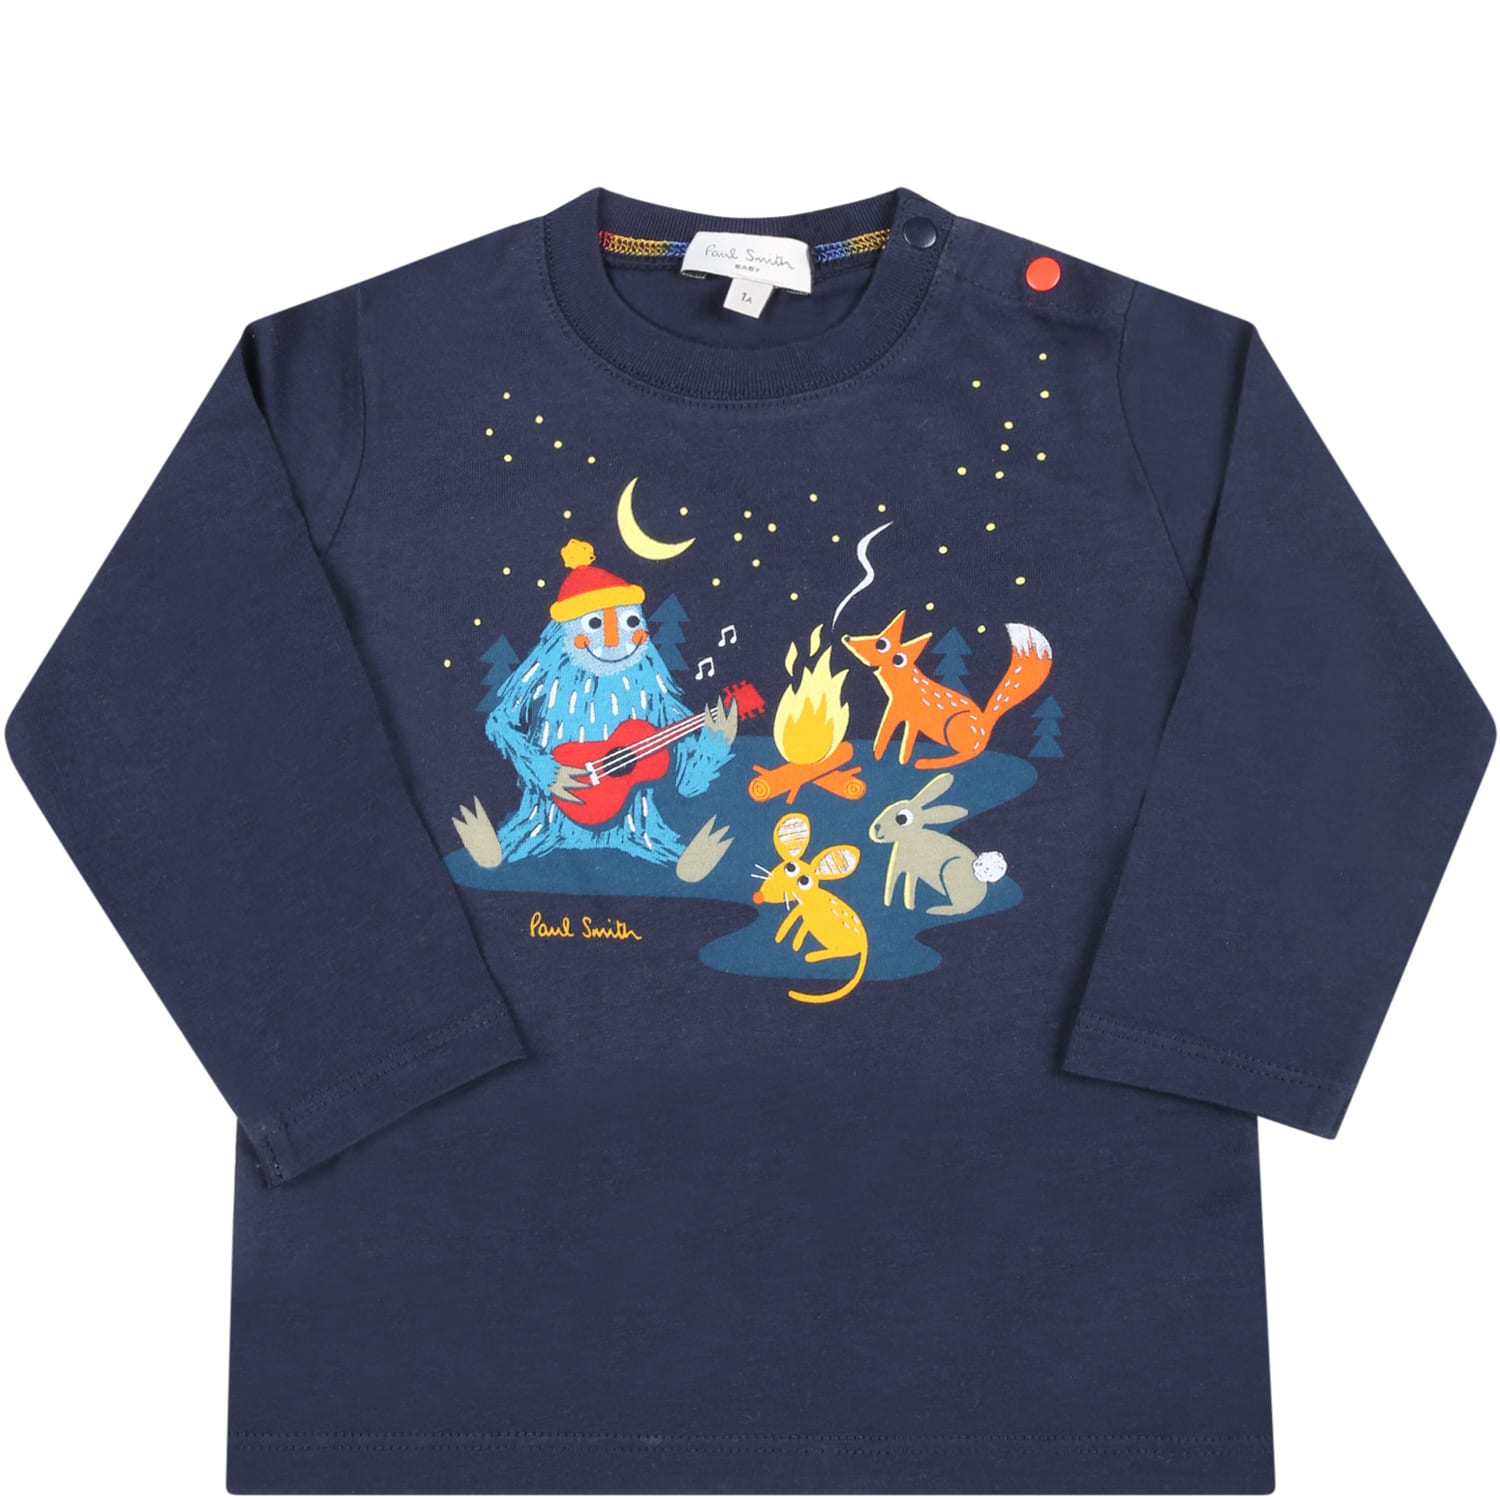 Paul Smith Junior Blue T-shirt For Baby Boy With Animals